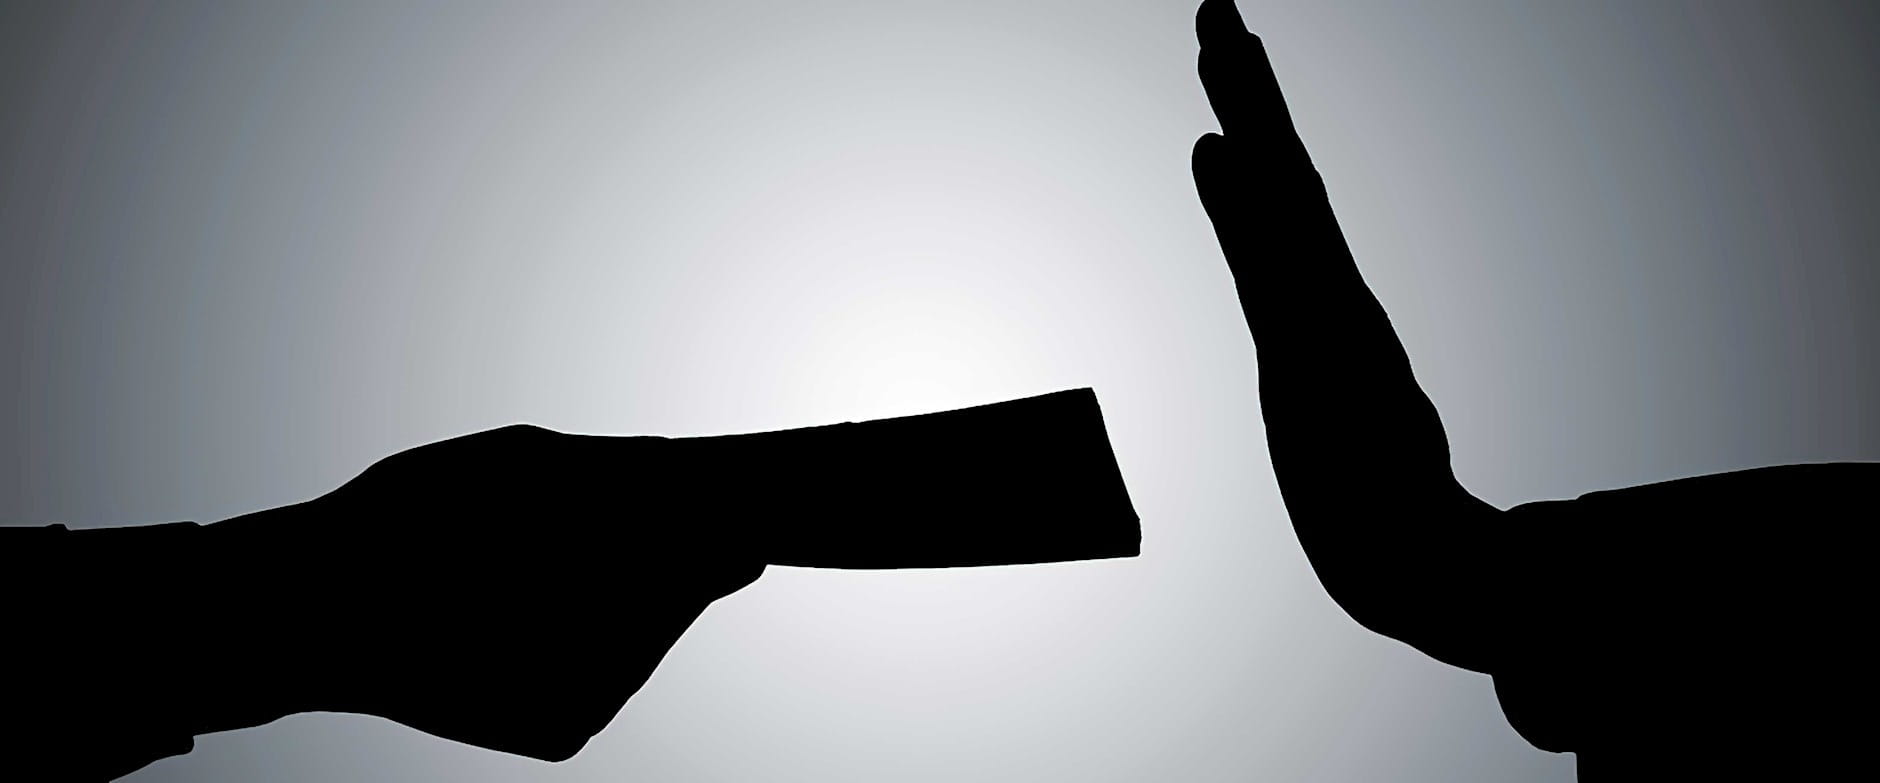 Silhouette of a person's hand giving money to another person with their hand in a stop gesture